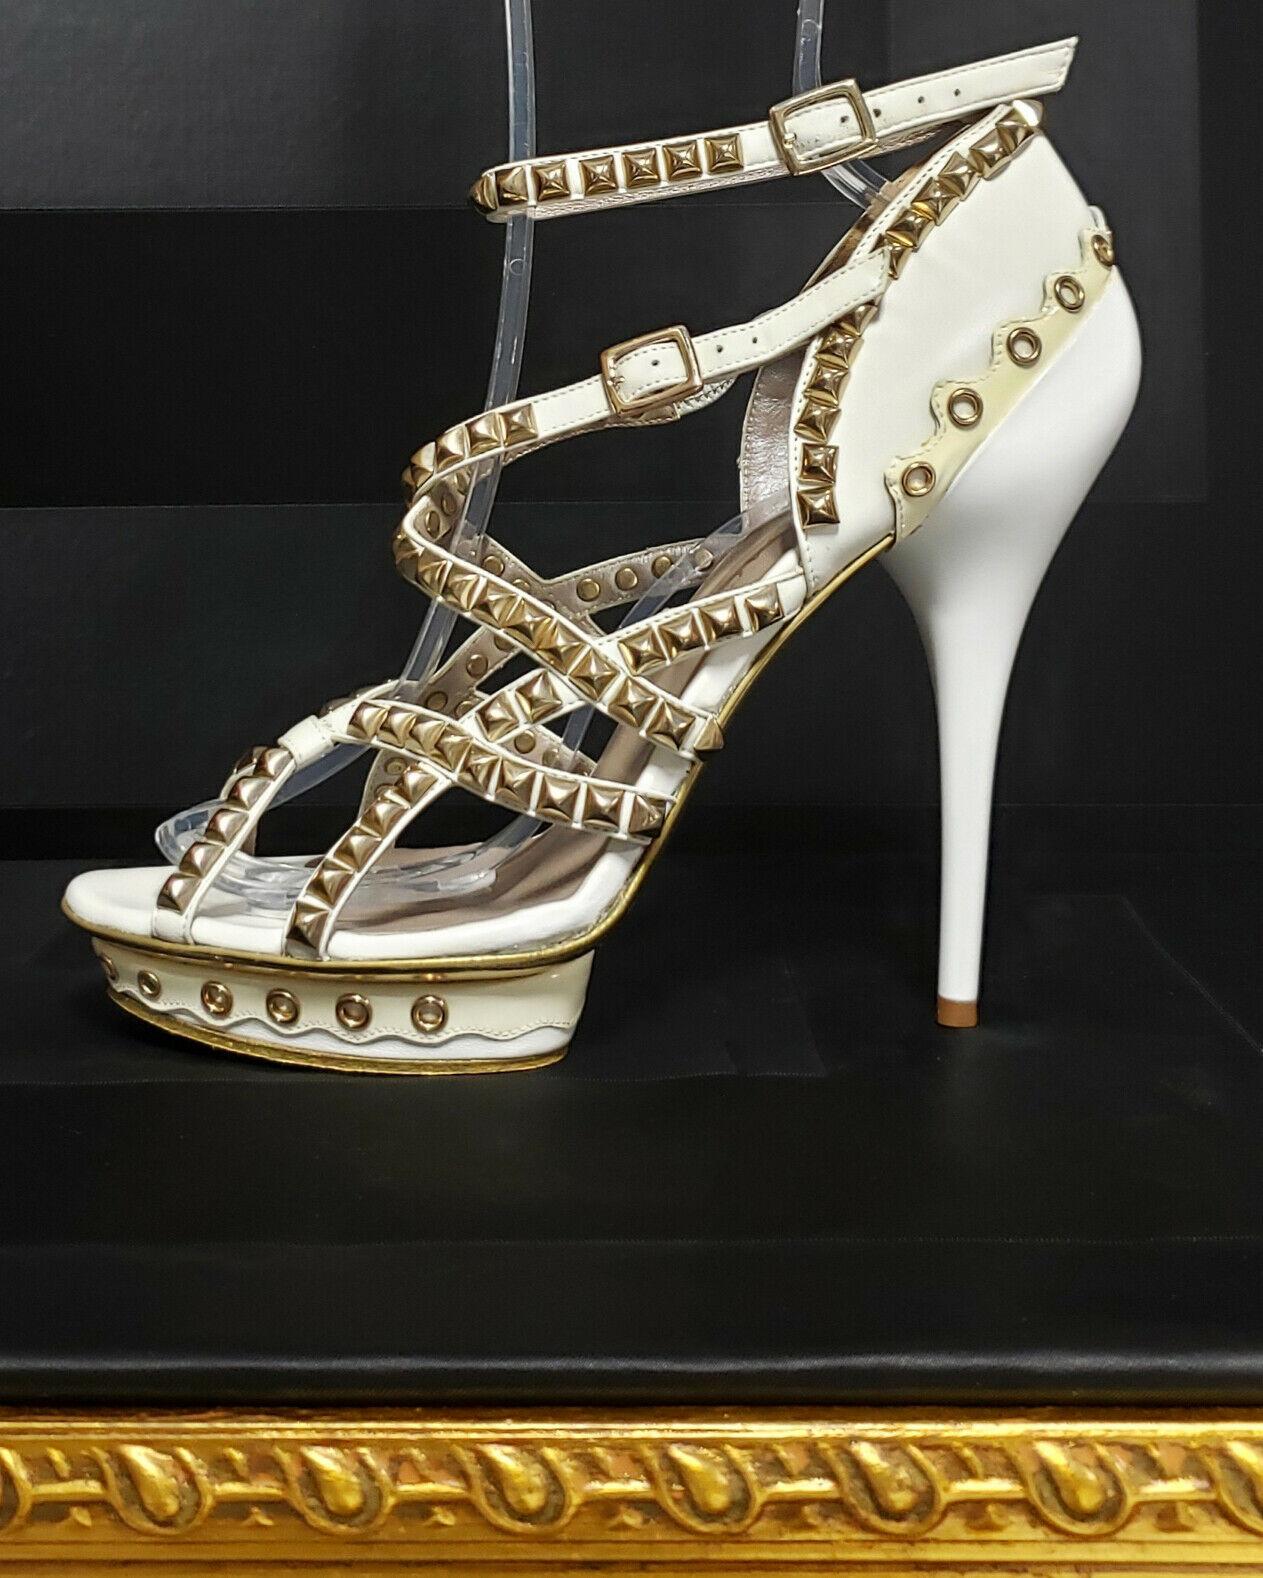 White VERSACE GOLD-PLATED STUDS WHITE SANDALS SHOES from ATELIER COLLECTION 39 - 9